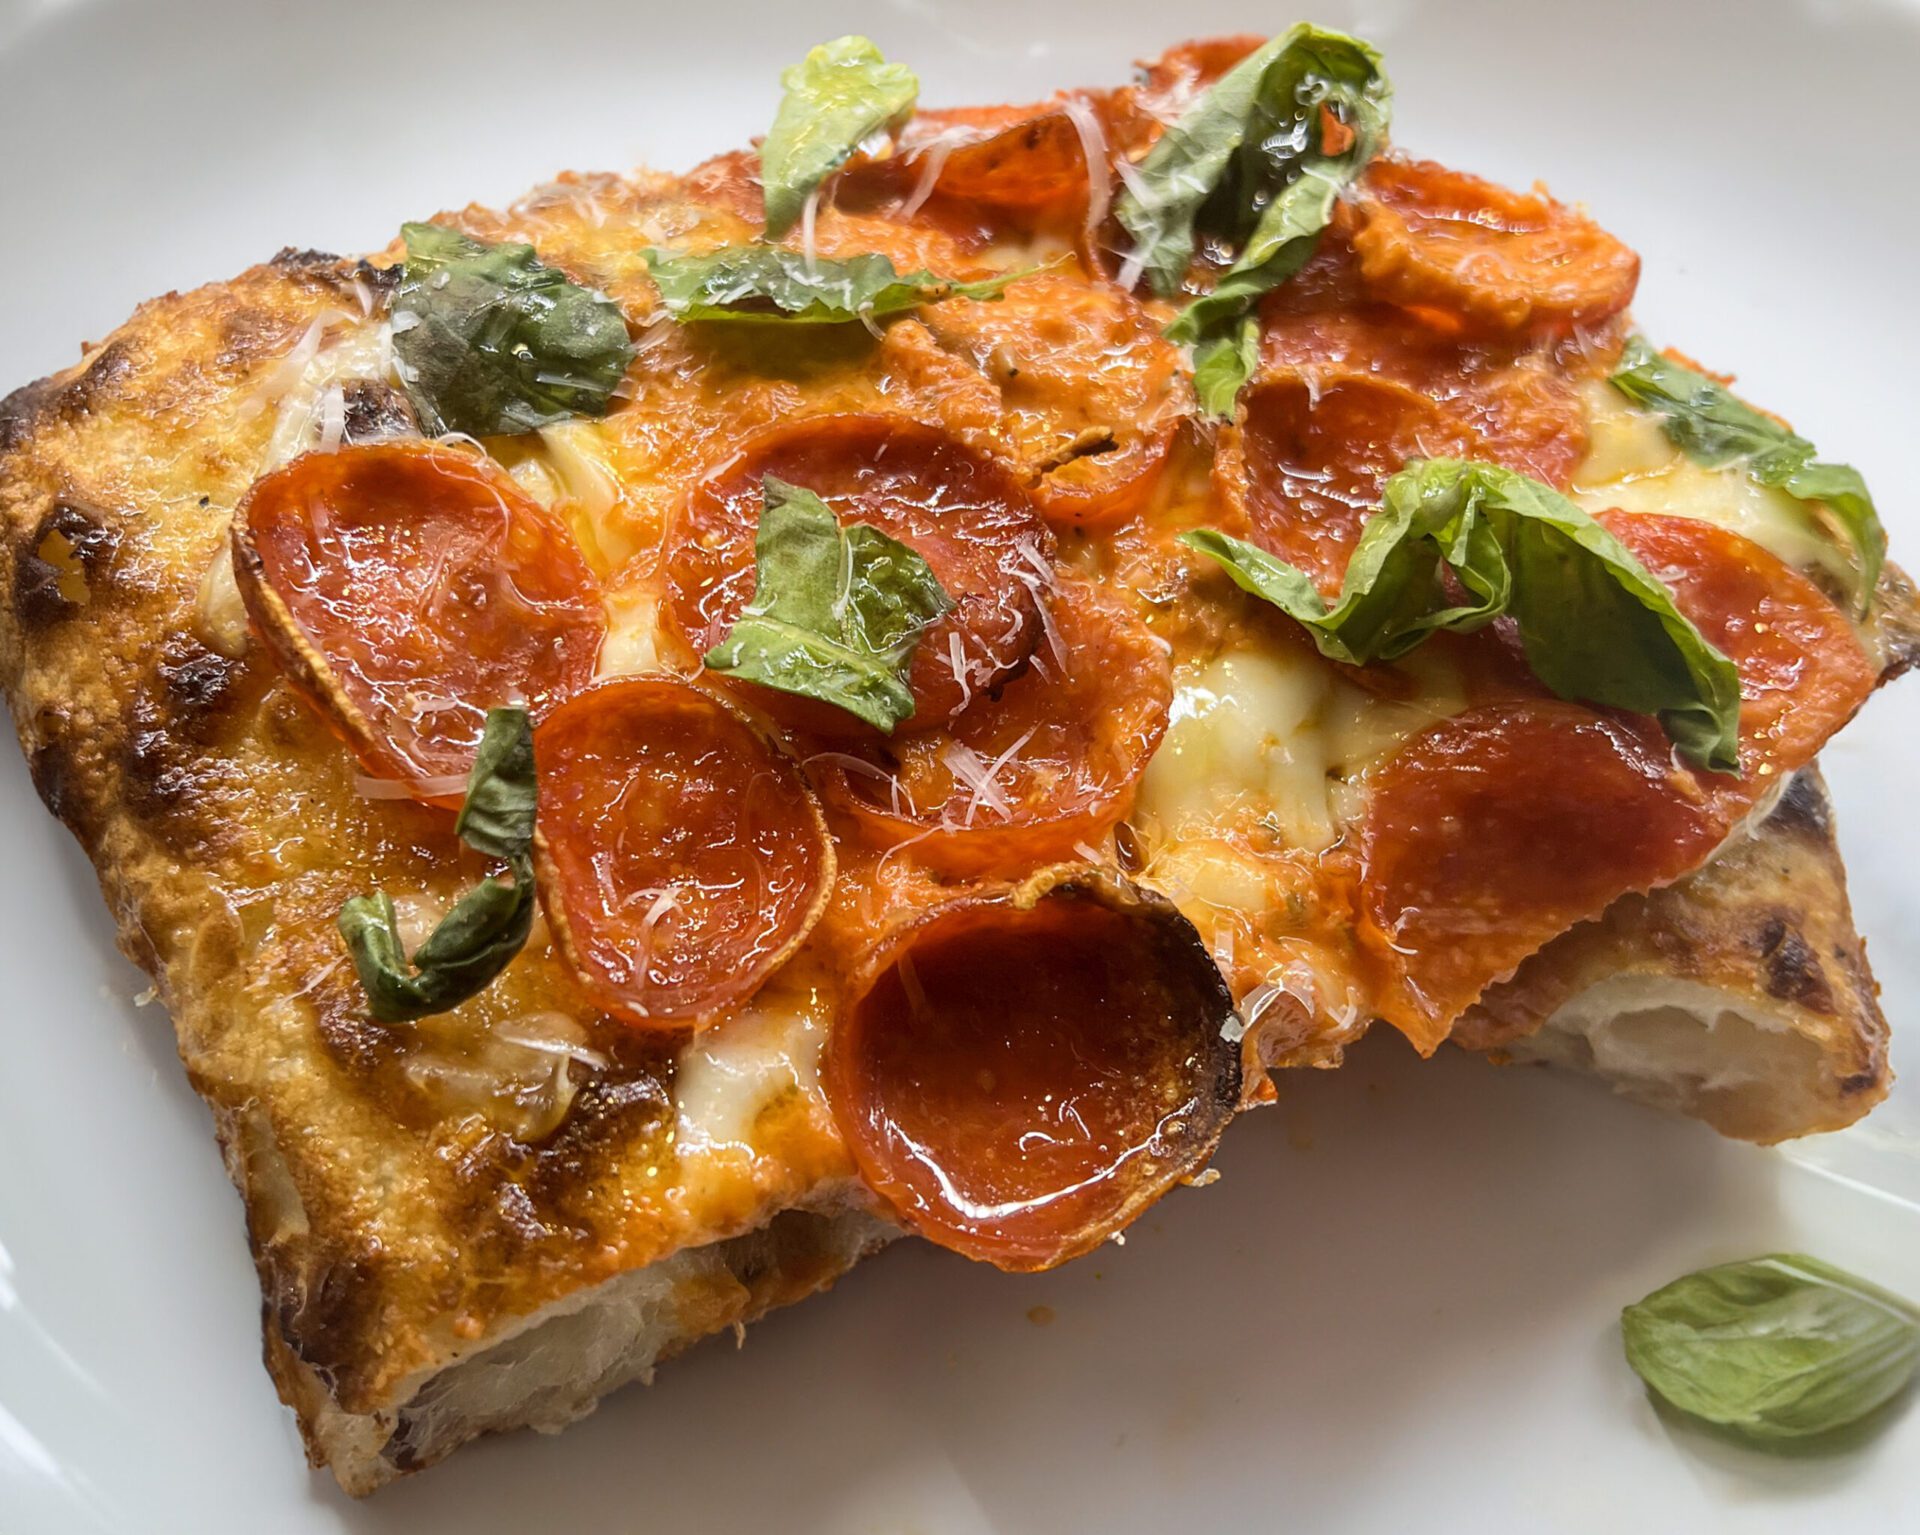 Slice of pizza with vodka sauce, pepperoni, and basil